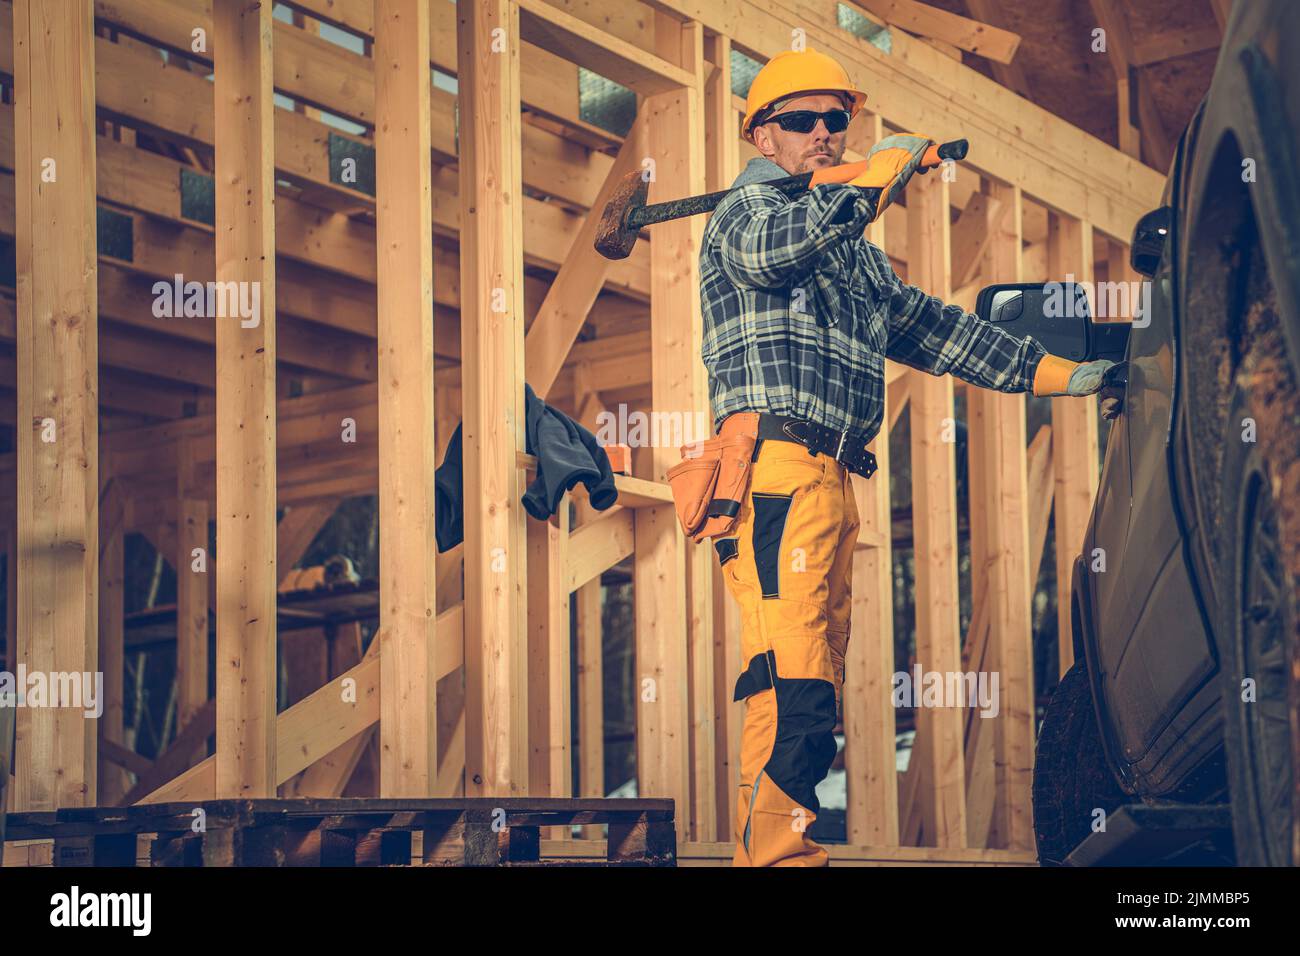 Caucasian Contractor Holding a Hammer on His Shoulder While Opening His Pickup Truck to Pack Up His Tools After Completing a Day's Work at the Constru Stock Photo